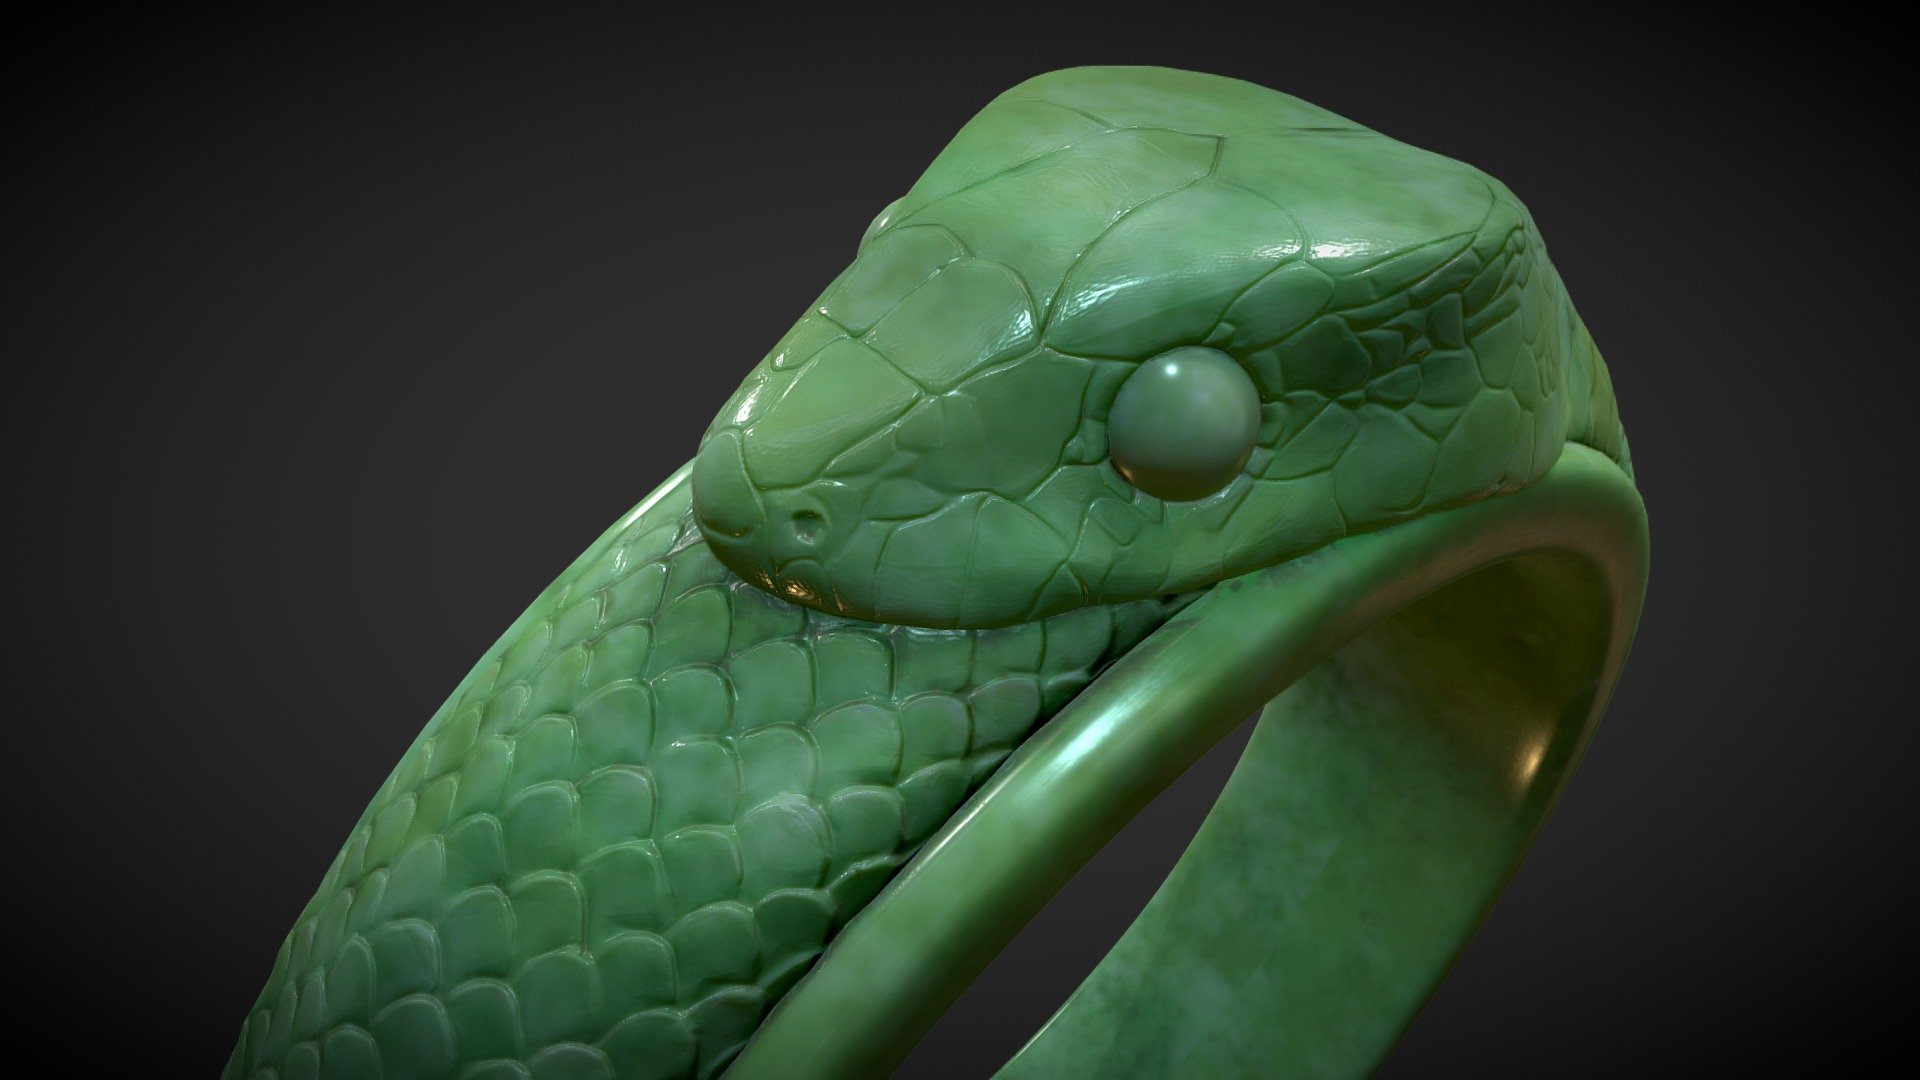 Snack Ring V1

Ouroboros snake ring Ornament

Jade Texture

Textures include:
         Base Color
         Normal
         Roughness
         Metallic
         AO

Find more assets/videos/art/info at the following links :-

-ARTSTATION: https://www.artstation.com/dickson_mejal 

-YOUTUBE:  https://www.youtube.com/channel/UC7eLV70TmOewp1c4VQsO-Cg

-SKECHFAB: https://sketchfab.com/dicksonmejal

-LINKEDIN: https://www.linkedin.com/in/dickson-mejal-21b951294/

-BEHANCE: https://www.behance.net/dicksonmejal - Ouroboros snake ring V5 (JADE ) - 3D model by dickson_mejal (@dicksonmejal) 3d model